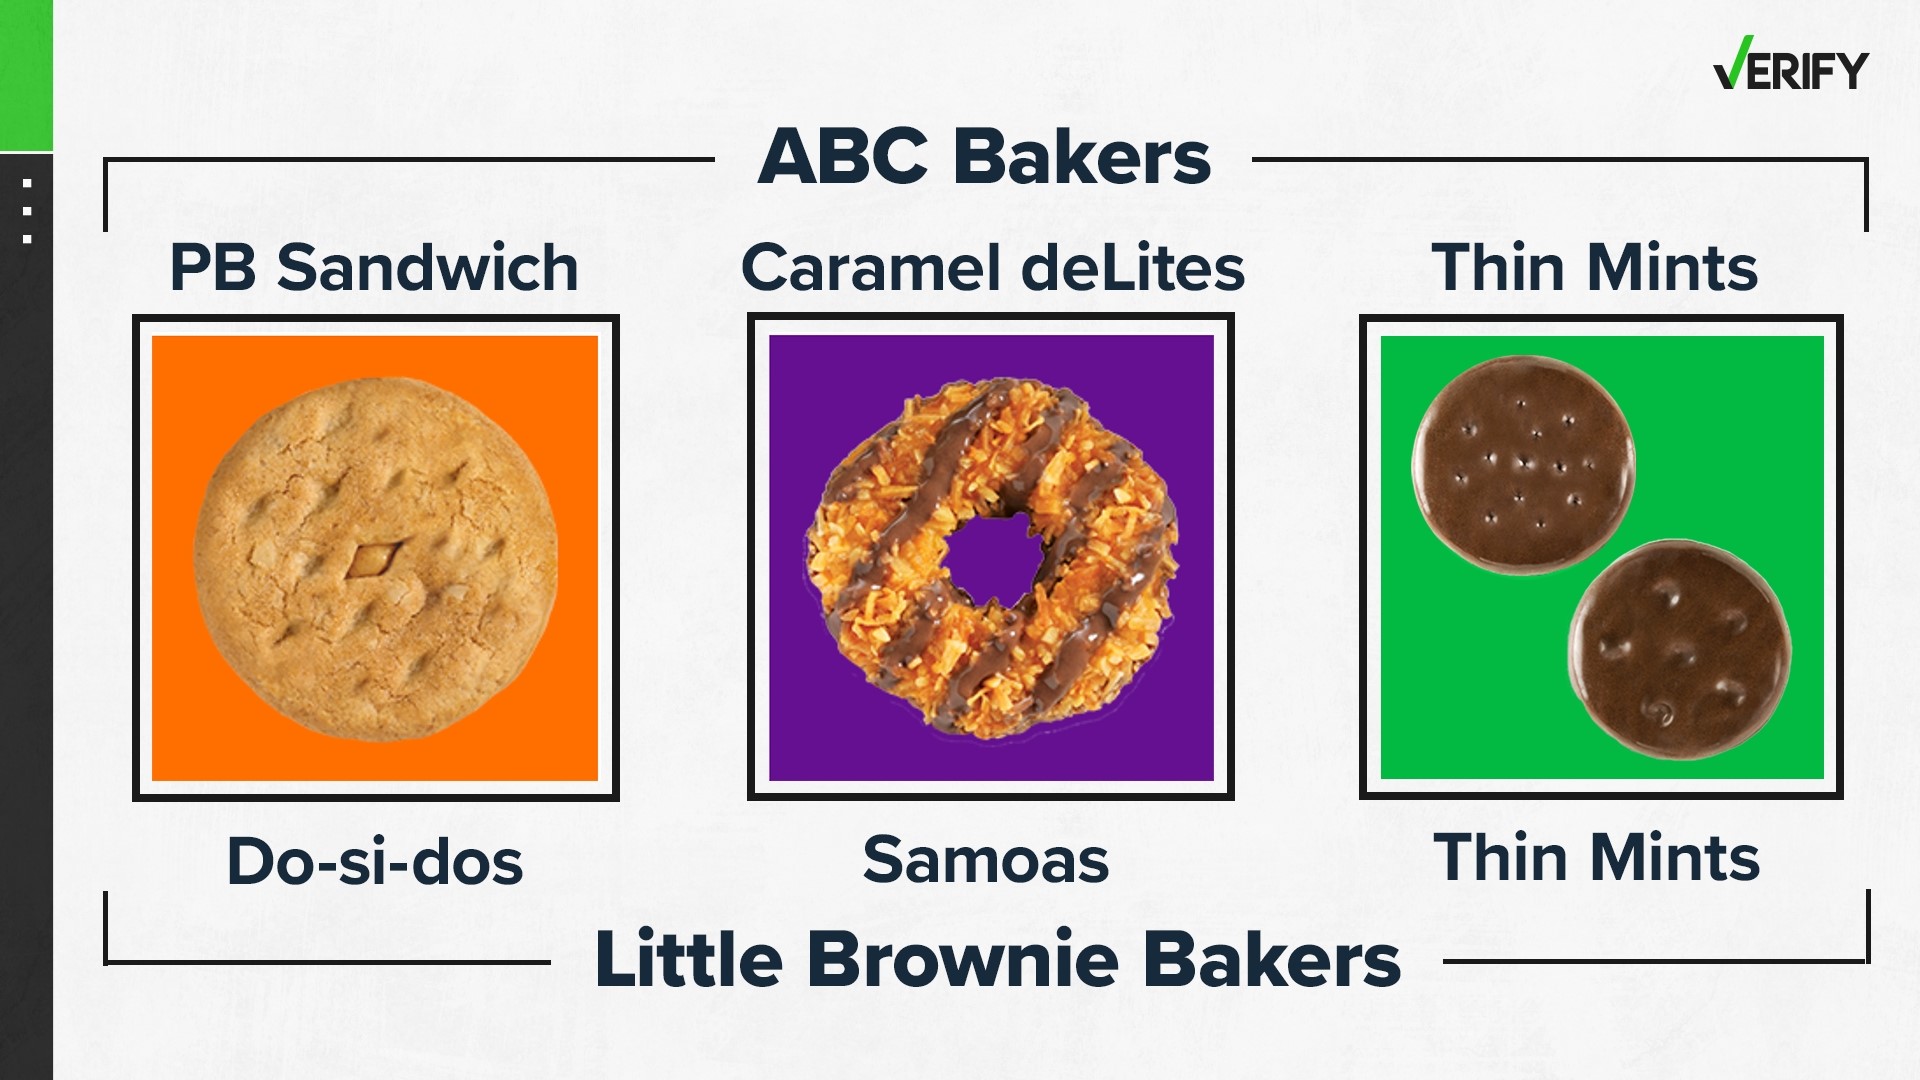 Who makes Girl Scout cookies? Local Girl Scout councils pick either ABC Bakers or Little Brownie Bakers to make your Thin Mints, Trefoils and more.